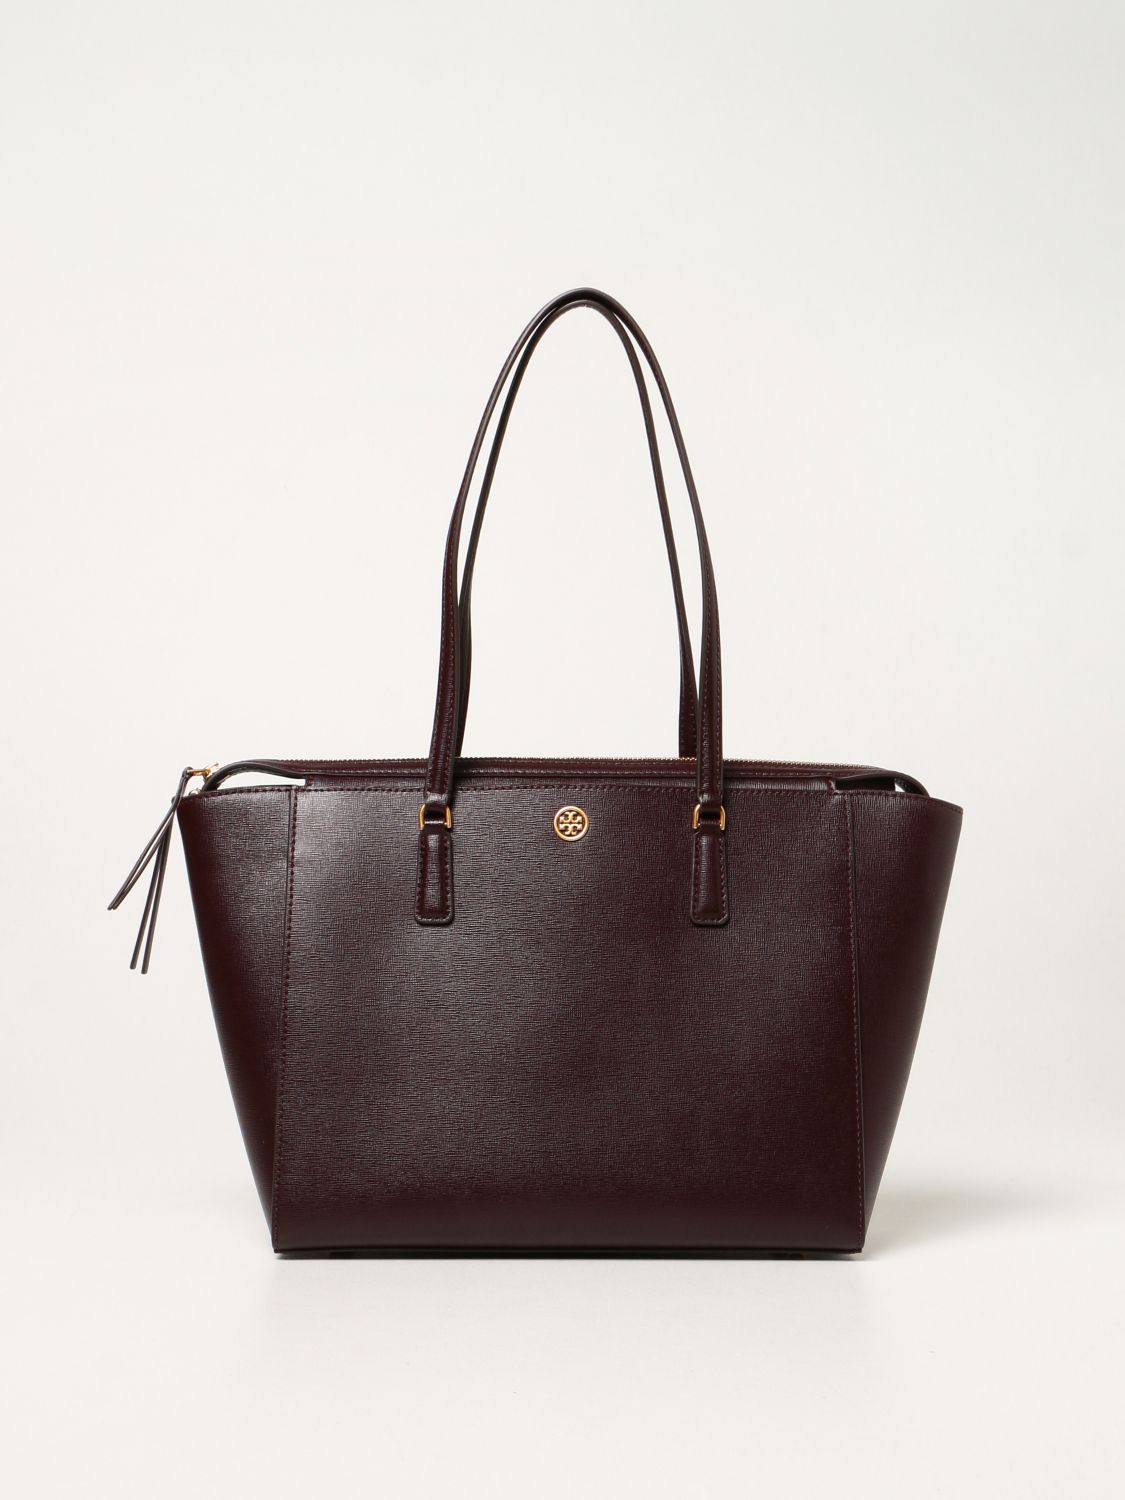 TORY BURCH: Robinson bag in saffiano leather - Burgundy | Tory Burch tote  bags 83078 online on 